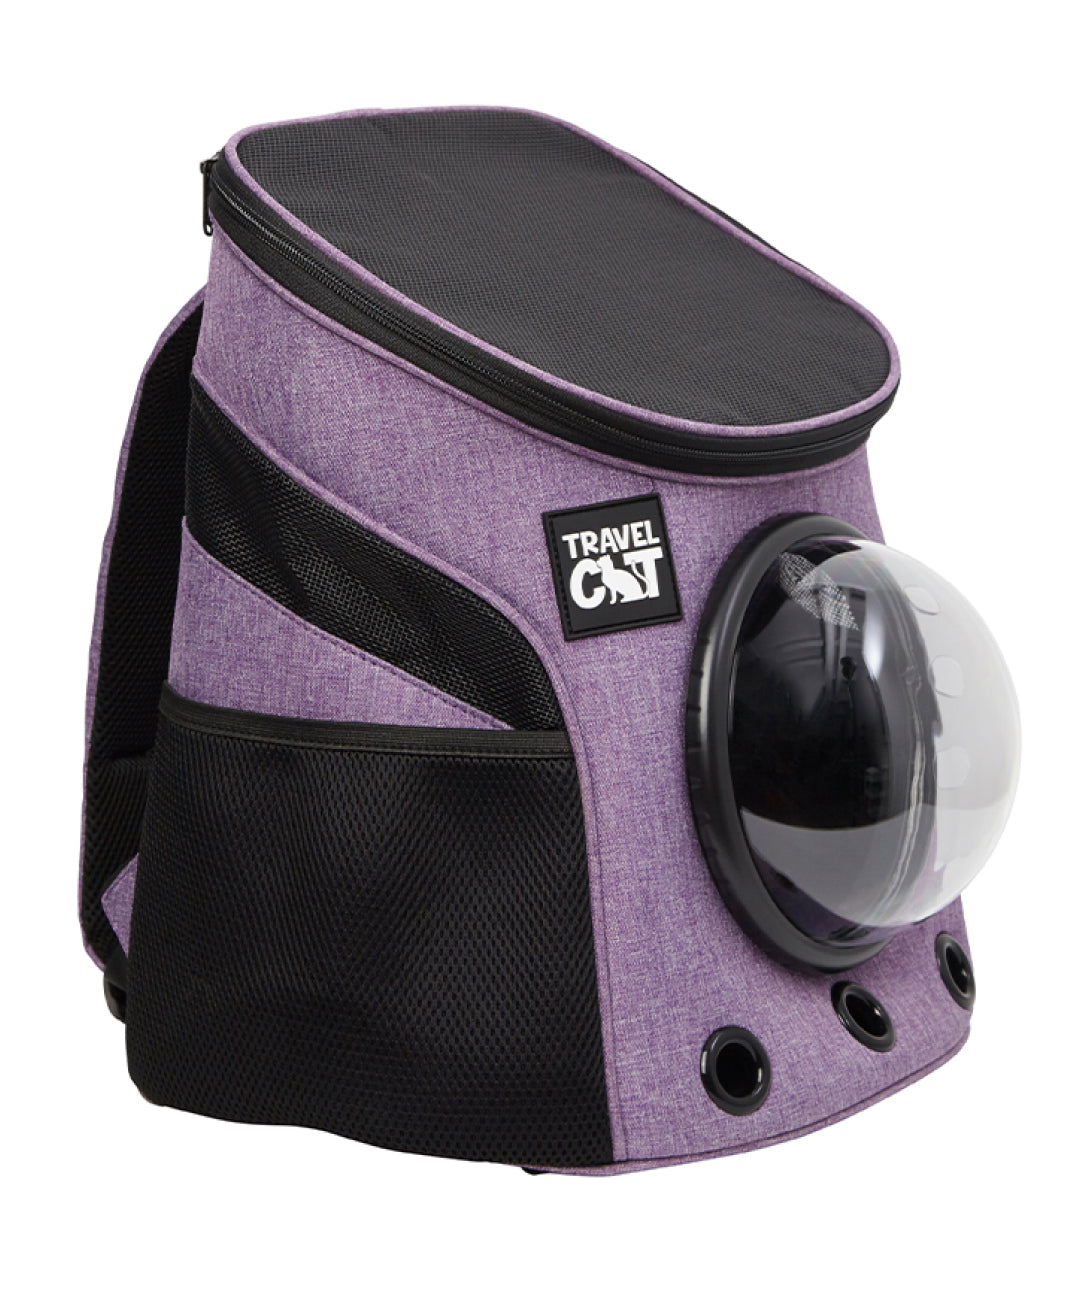 The Navigator Earth Convertible Cat Backpack - For Adventurous Cats